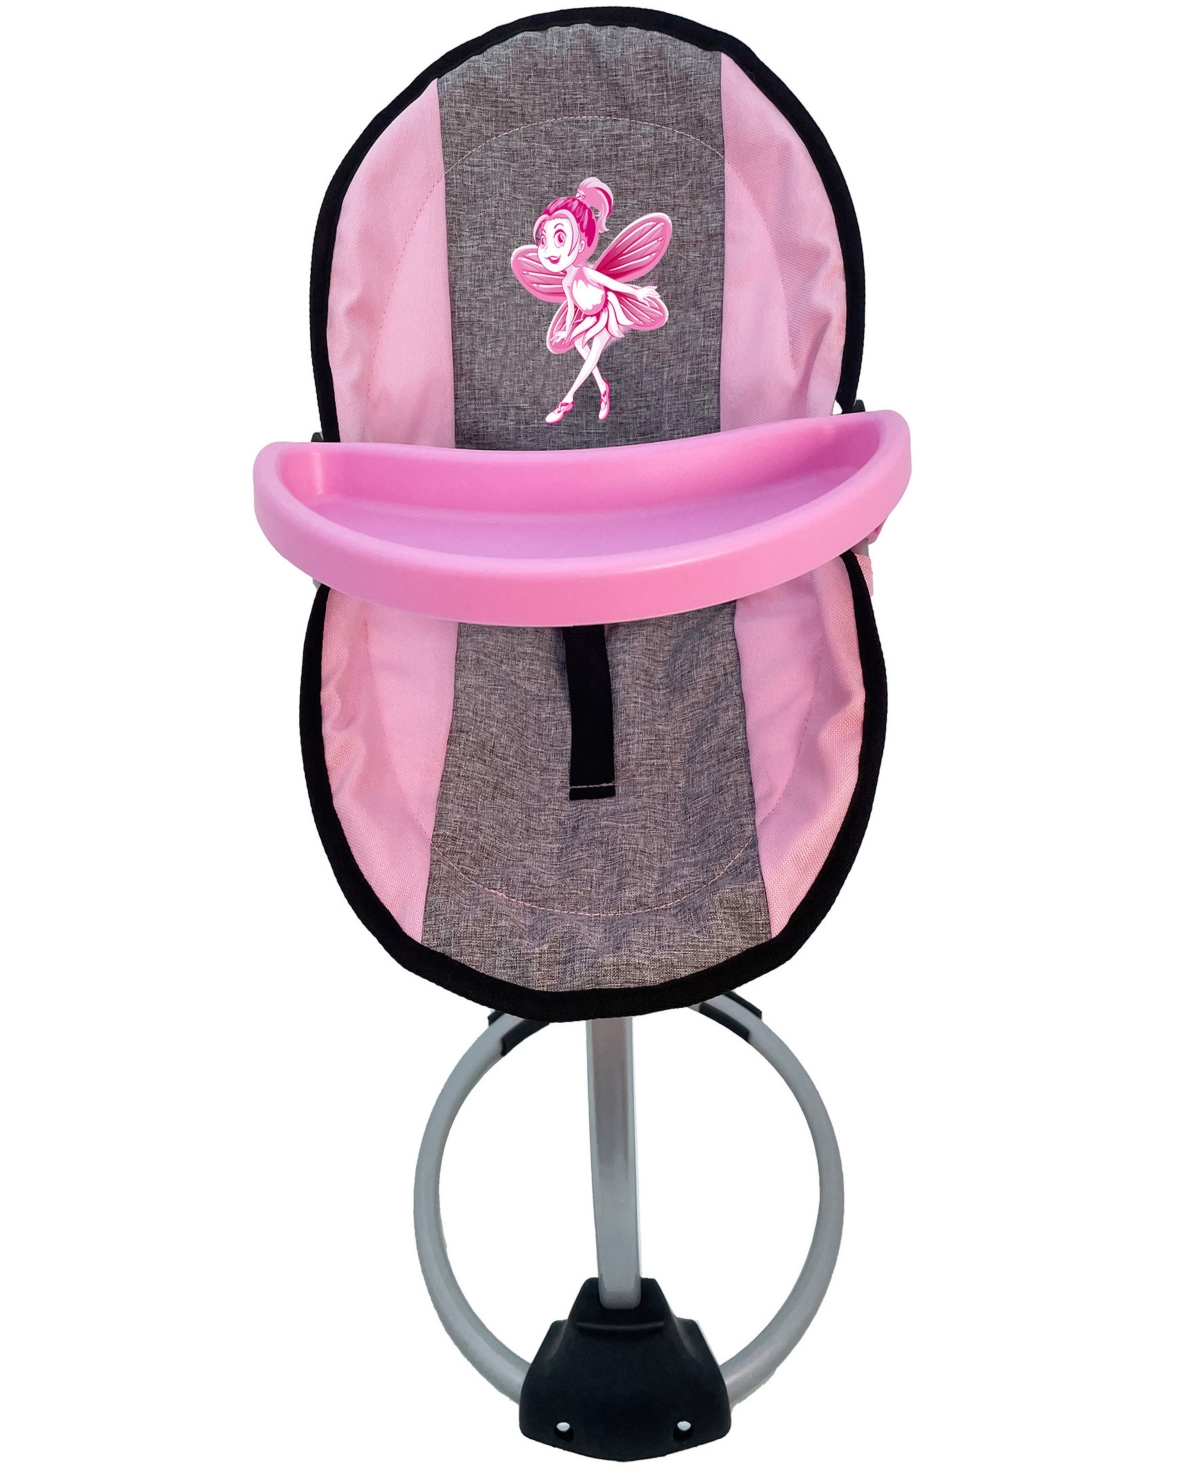 Dimian Bambolina 3-in-1 Doll Highchair Or Swing Set Kids Pretend Play In Multi